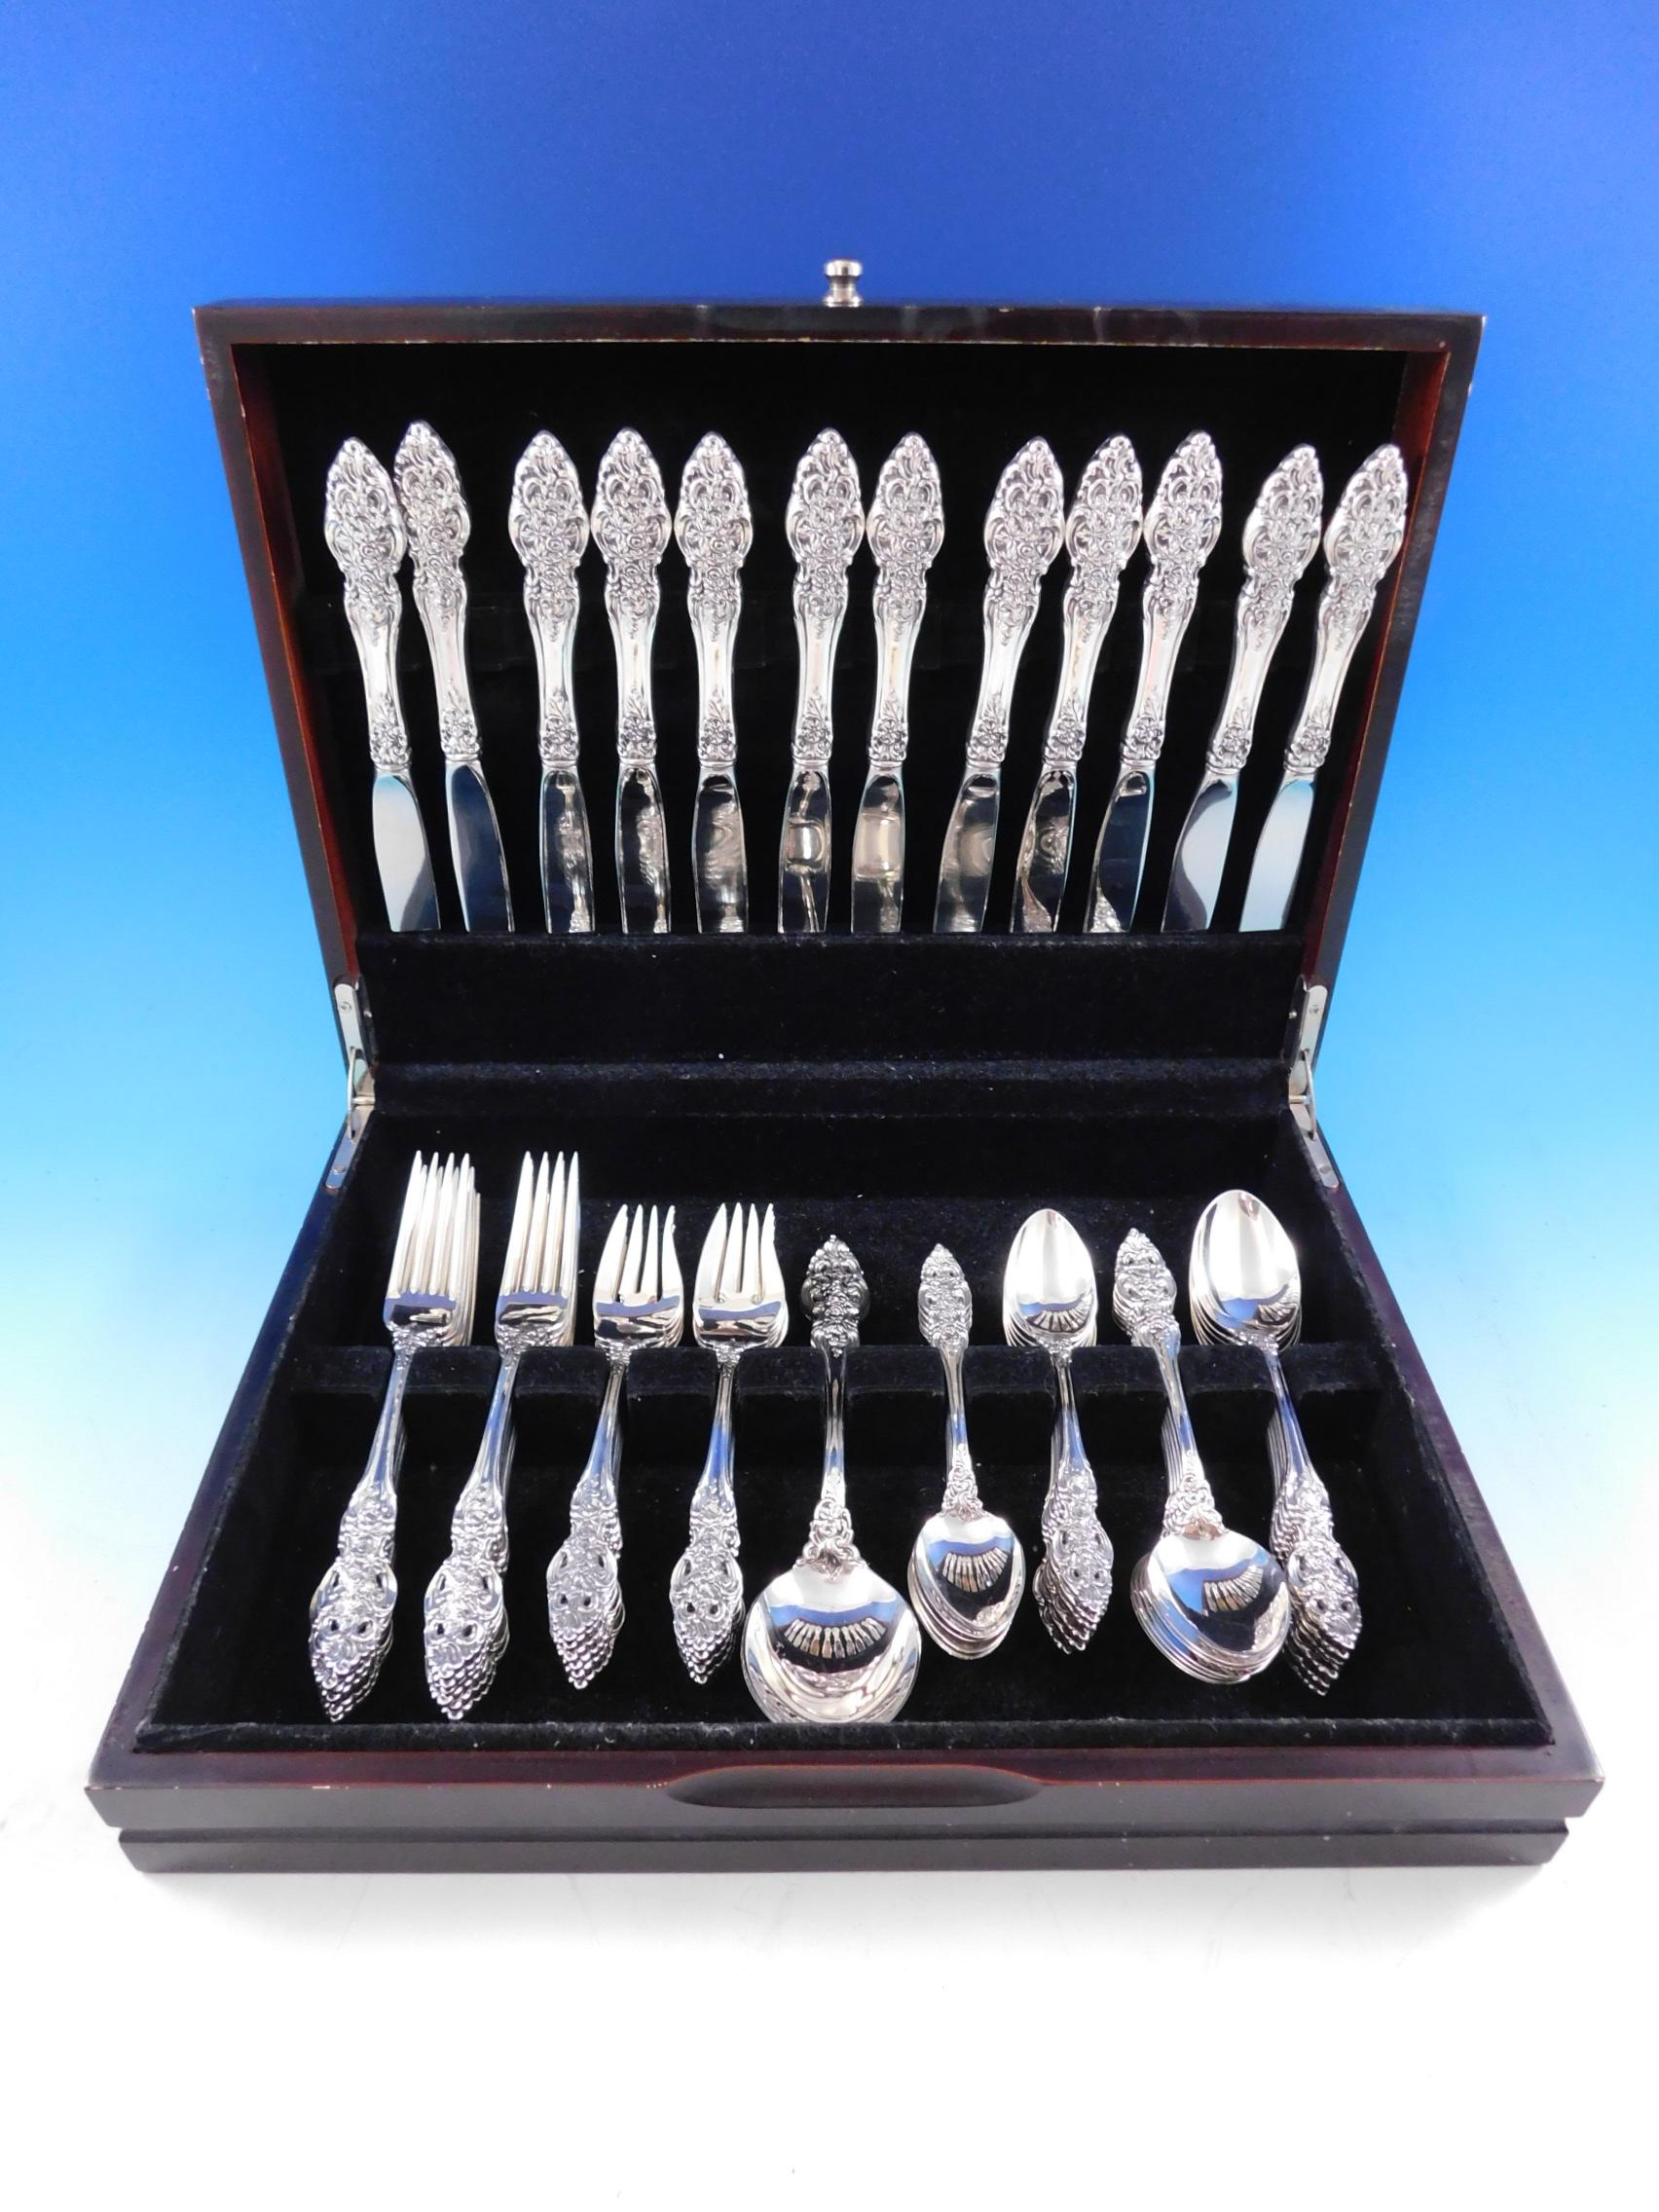 Elegant Vienna by Reed & Barton sterling silver flatware set with ornate floral, pierced handle - 62 pieces. This set includes:

 12 Knives, 9 1/4